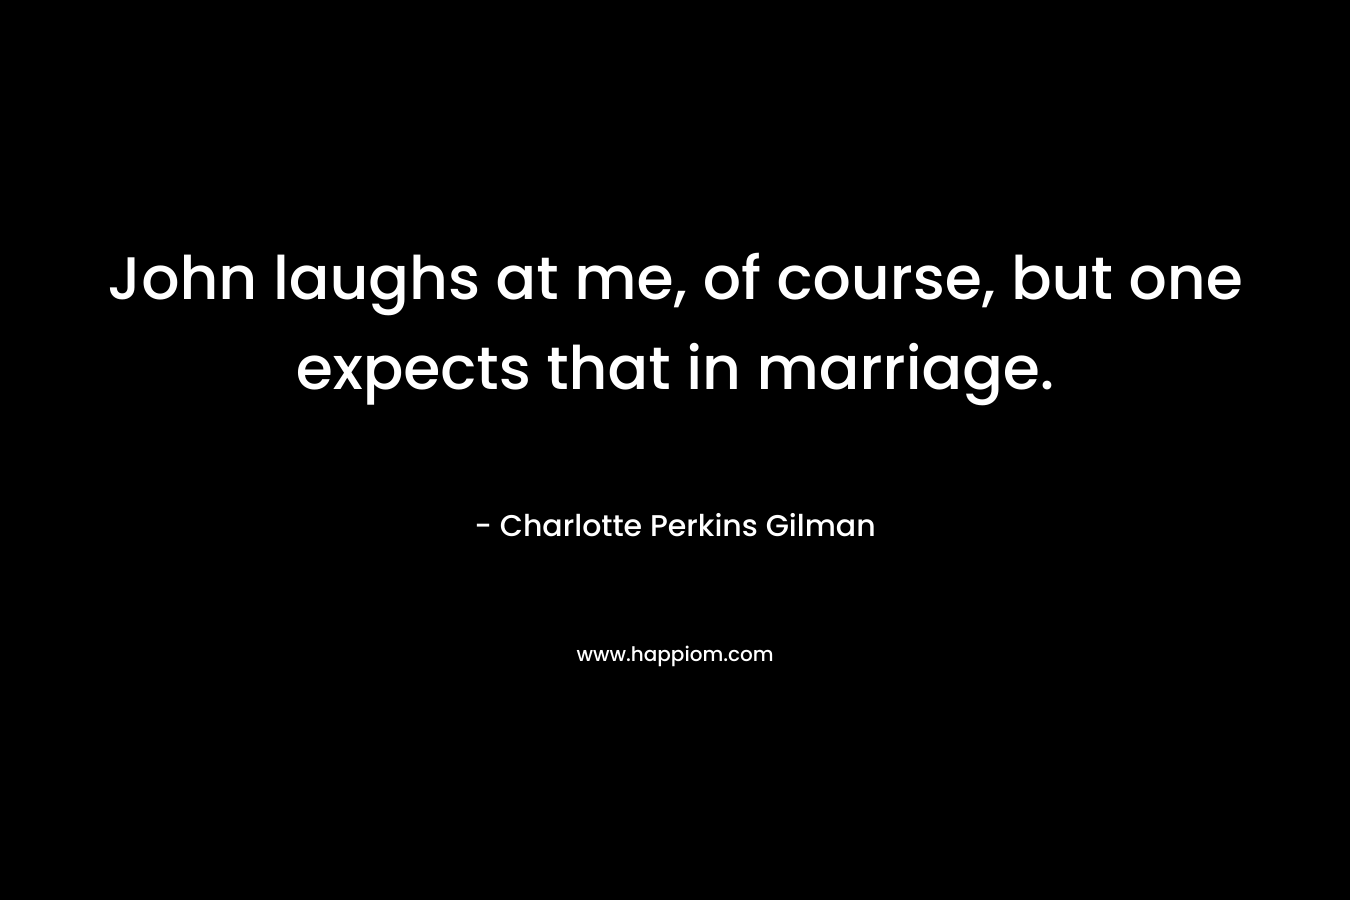 John laughs at me, of course, but one expects that in marriage. – Charlotte Perkins Gilman